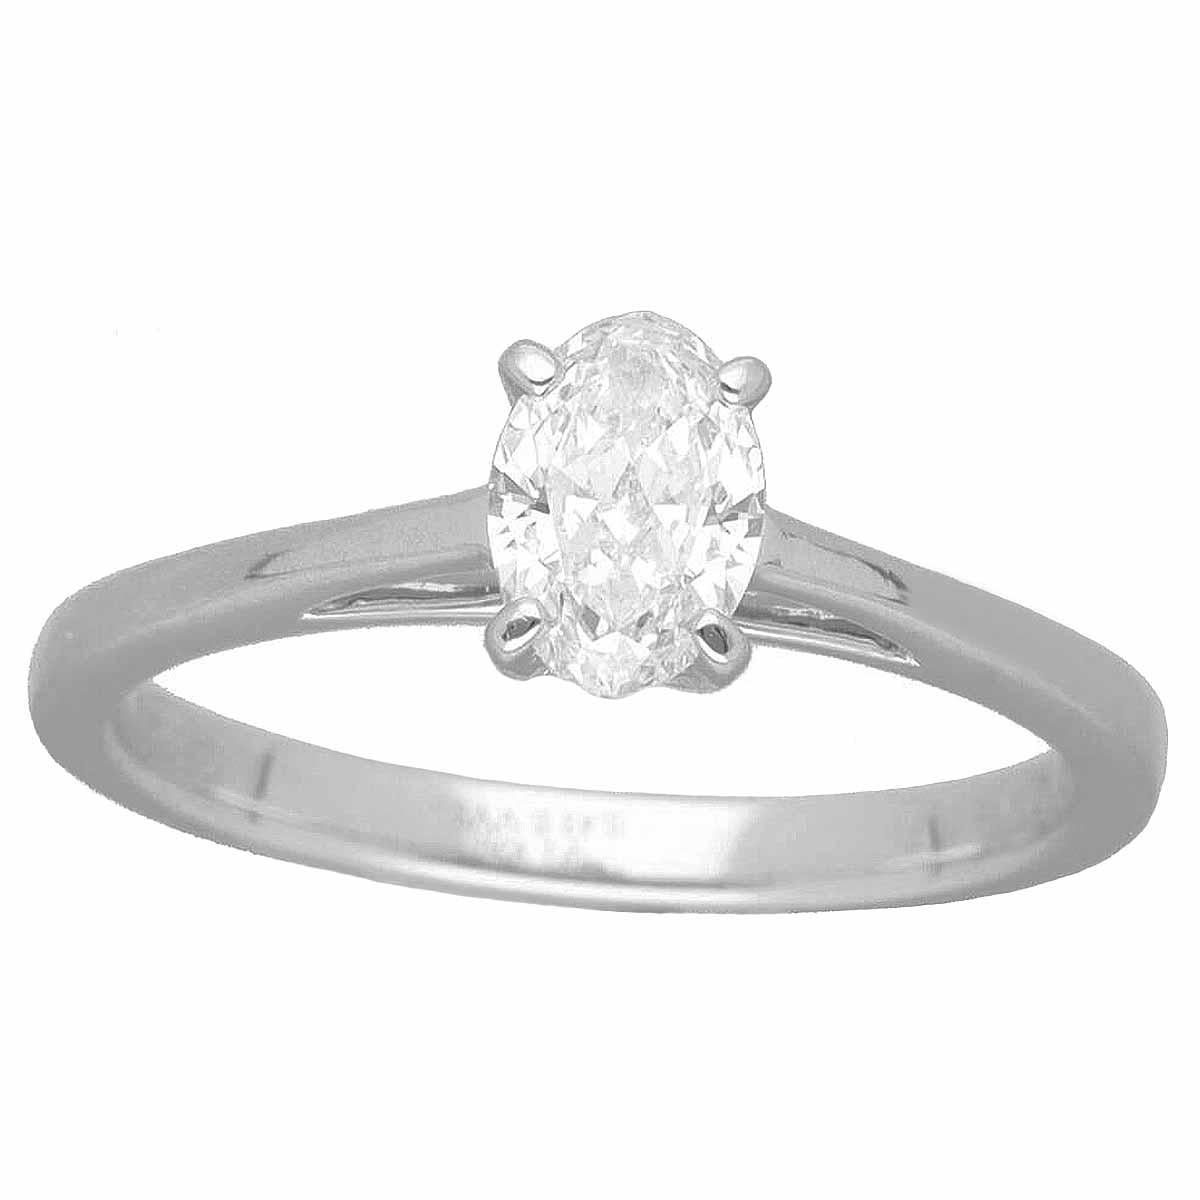 Brand:GRAFF
Name:Paragon Oval Shape Diamond Ring
Material:1P diamond (0.43ct E-VVS1), PT950 platinum
Weight:3.0g（Approx)
Ring size(inch):British & Australian:I 1/2  /   US & Canada:US 4 1/2 /  French & Russian:48 /  German:15 1/4  /  Japanese: 8 